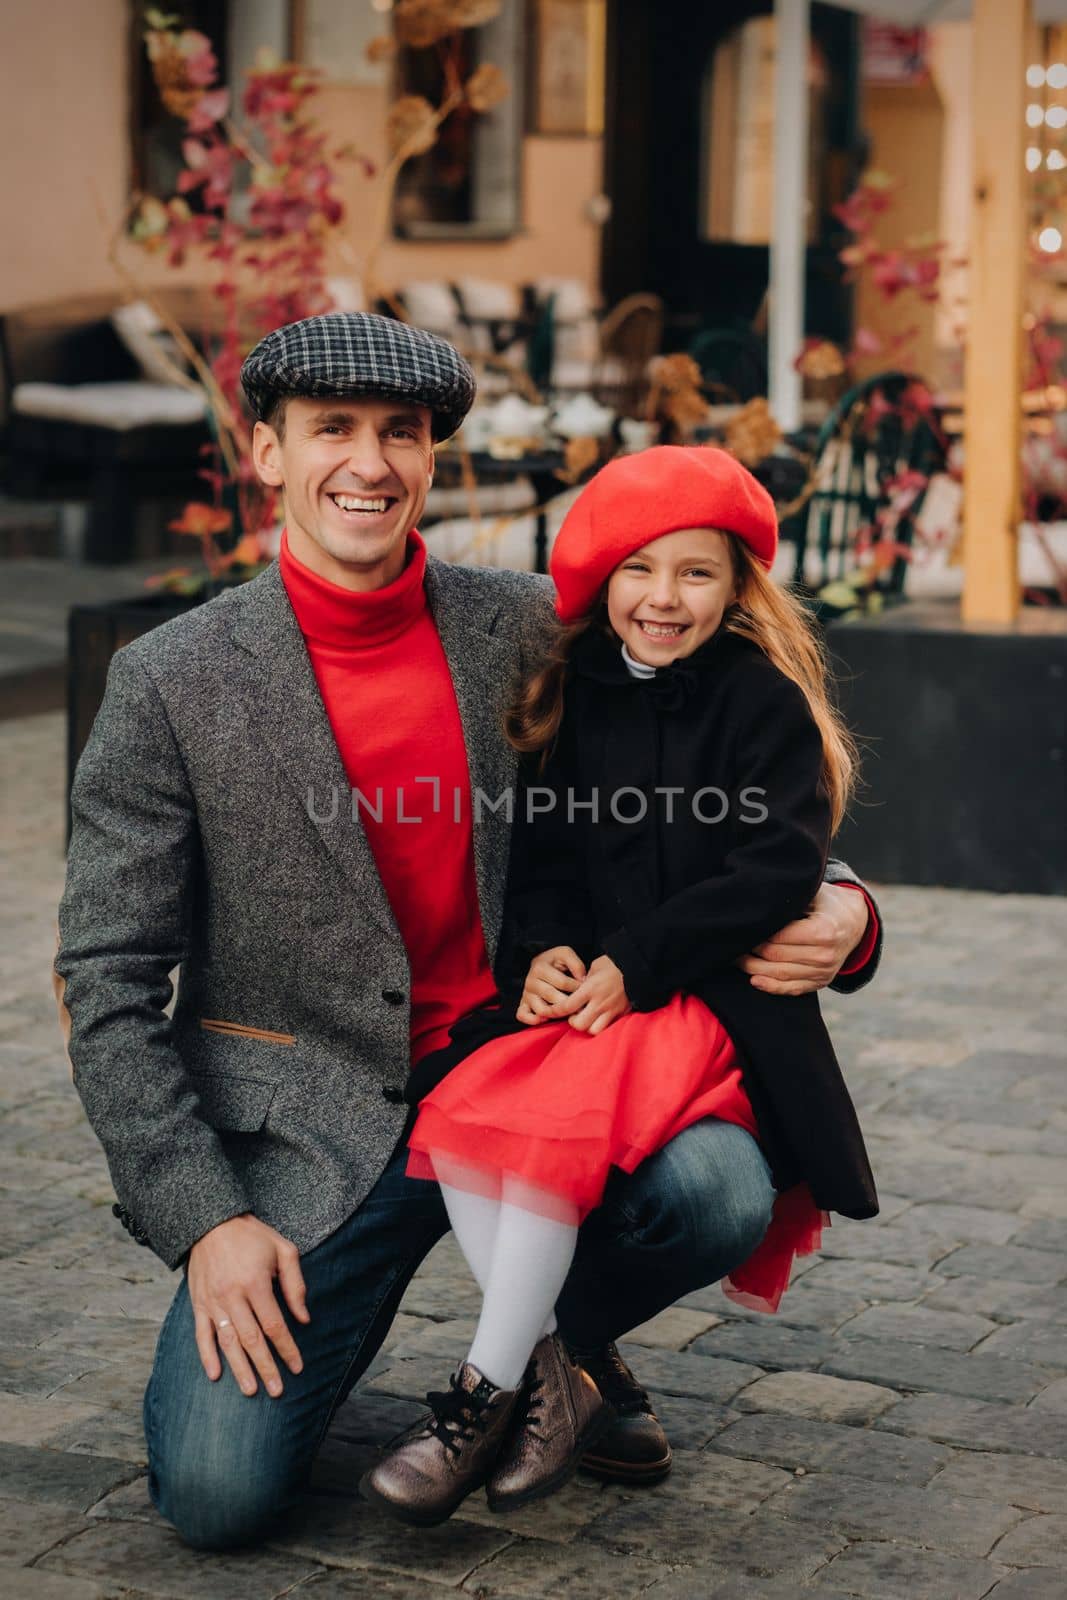 Portrait of a father and daughter sitting on a knee and being on a city street in autumn.